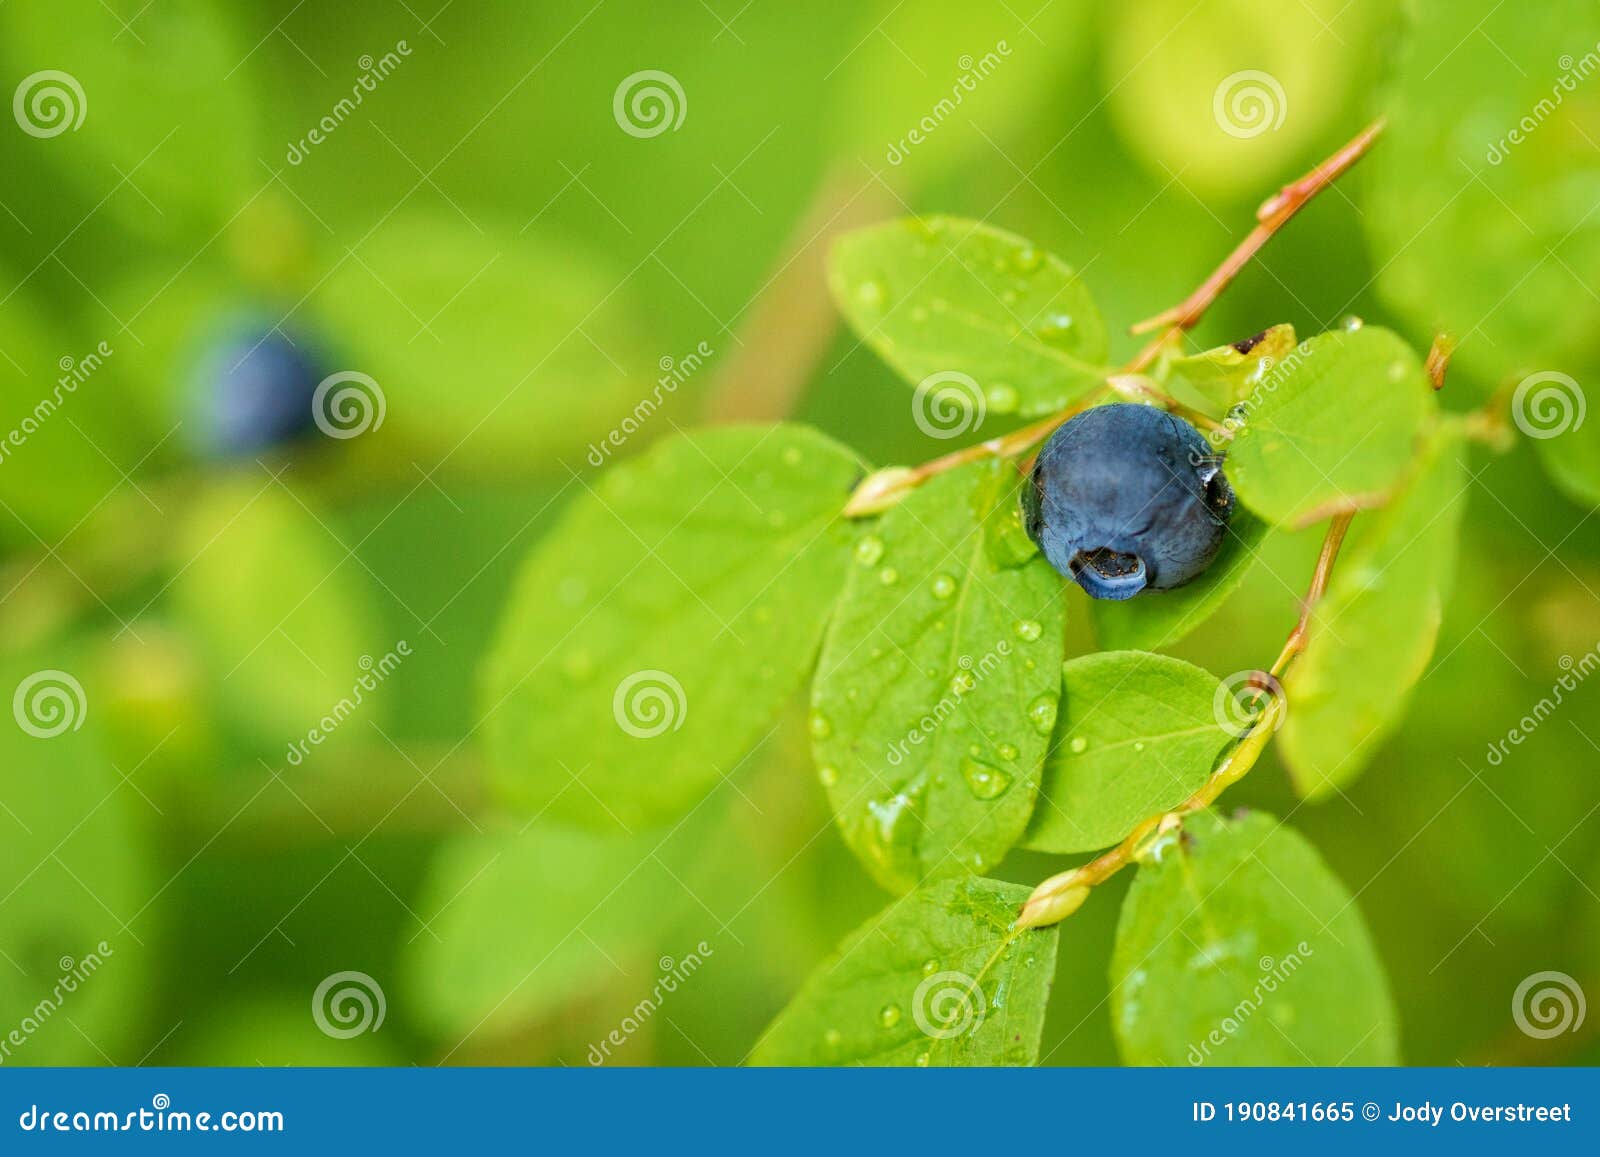 close-up of ripe blueberry in the rain